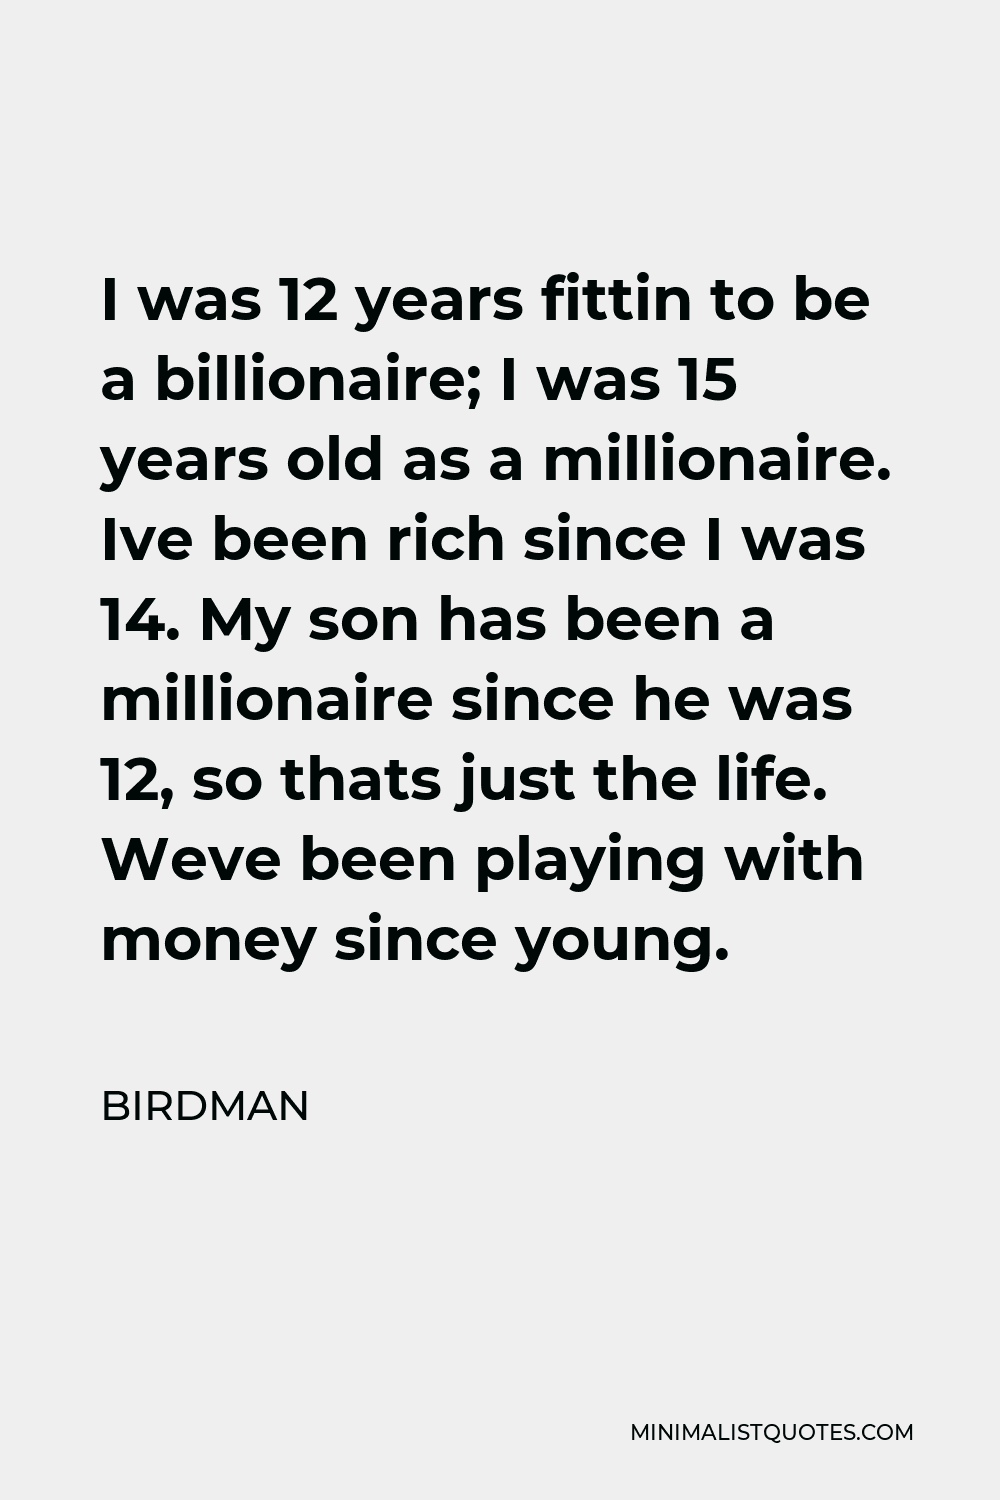 Birdman Quote - I was 12 years fittin to be a billionaire; I was 15 years old as a millionaire. Ive been rich since I was 14. My son has been a millionaire since he was 12, so thats just the life. Weve been playing with money since young.